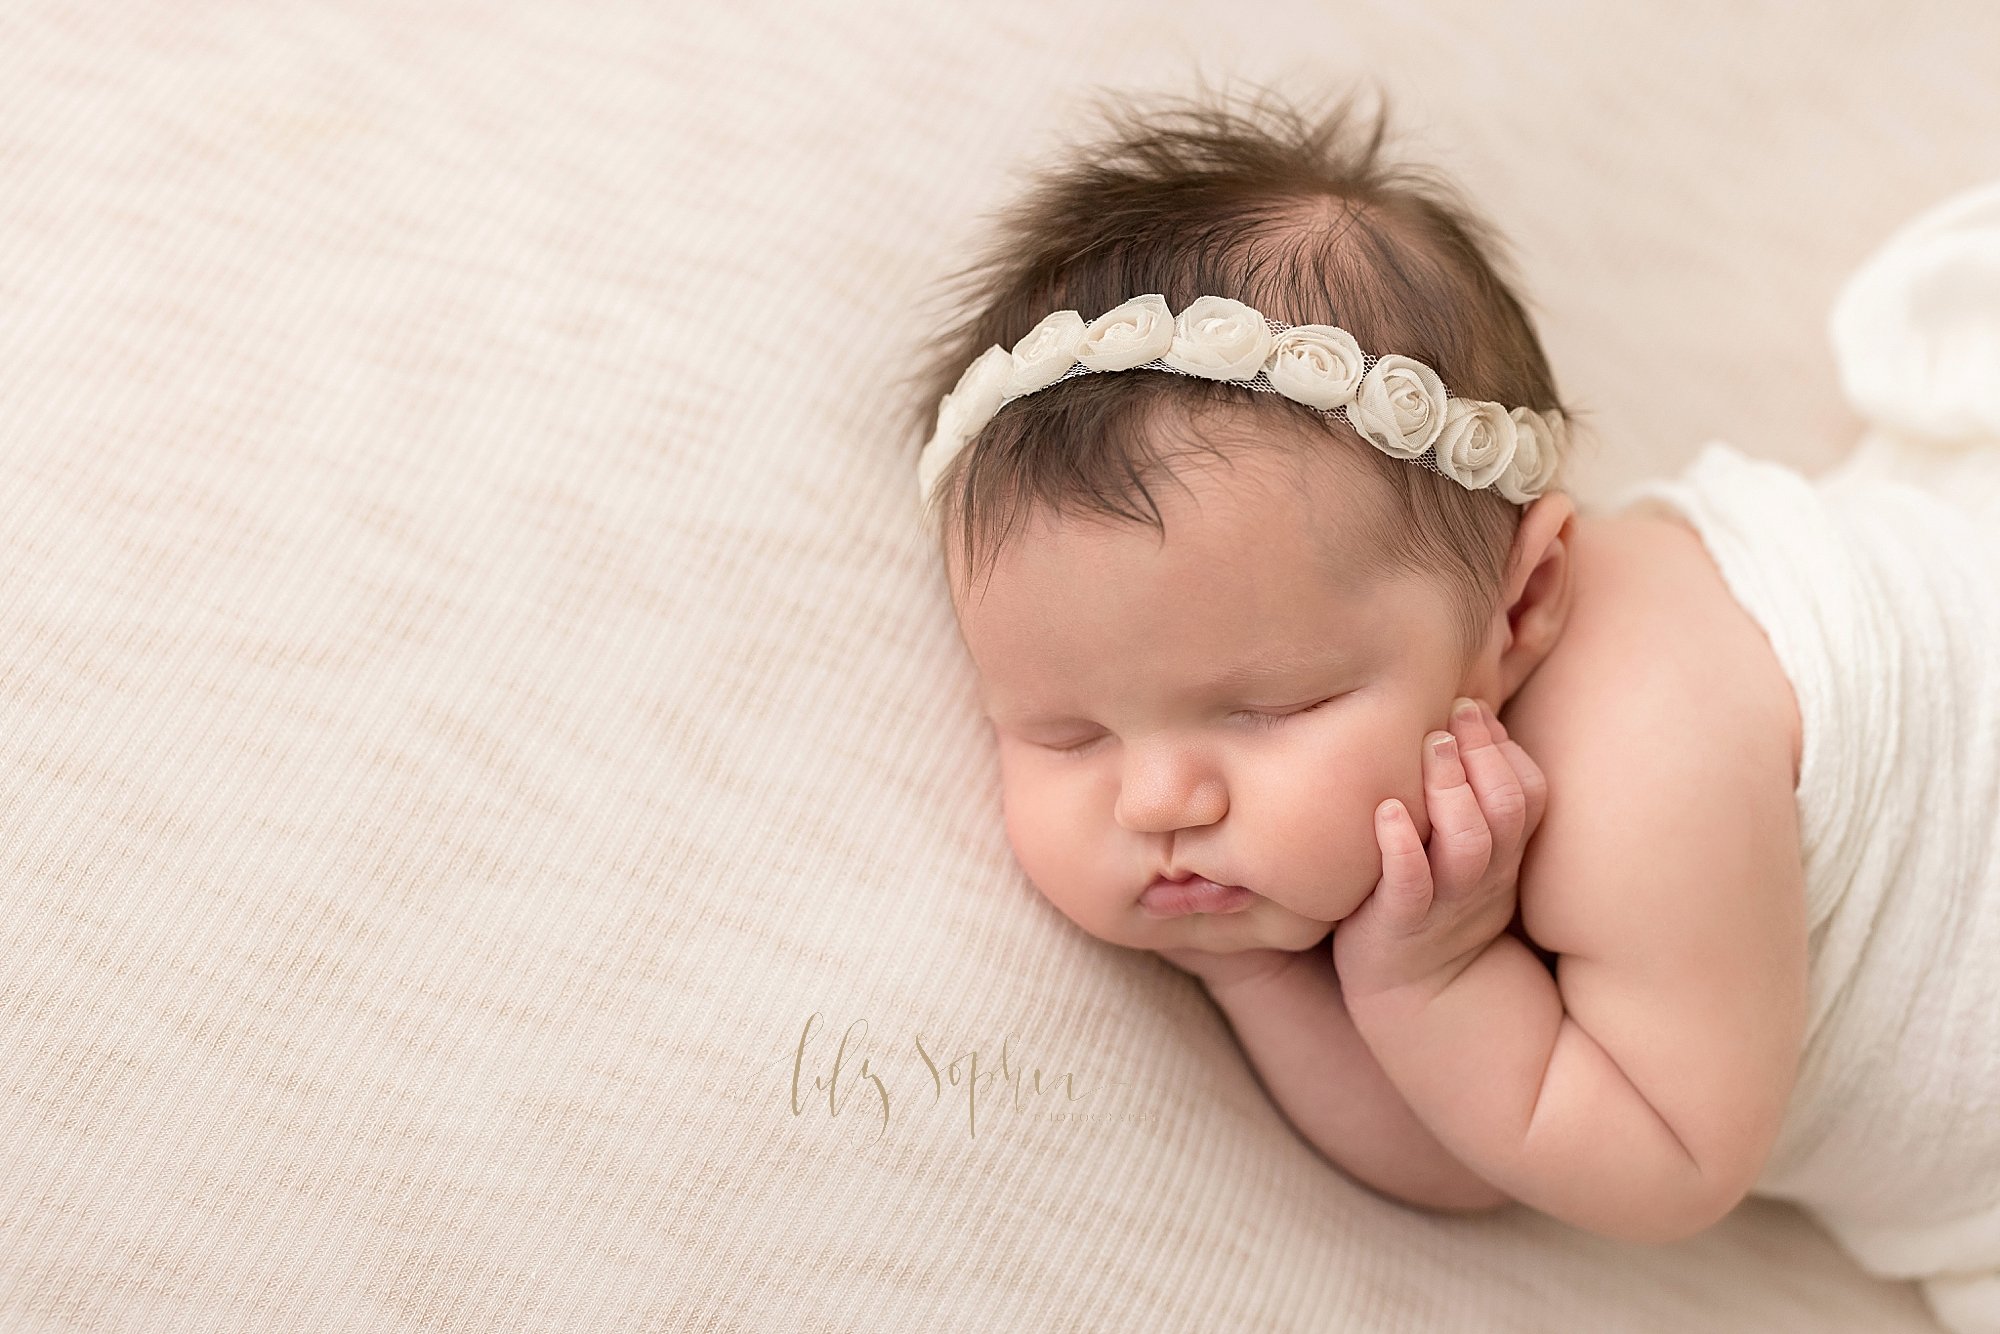  Newborn picture of a newborn baby girl wearing a tulle rose headband in her fly away hair lying on her right side with her chubby cheeks held in her hands as she sleeps in a photography studio near Smyrna in Atlanta that uses natural light. 